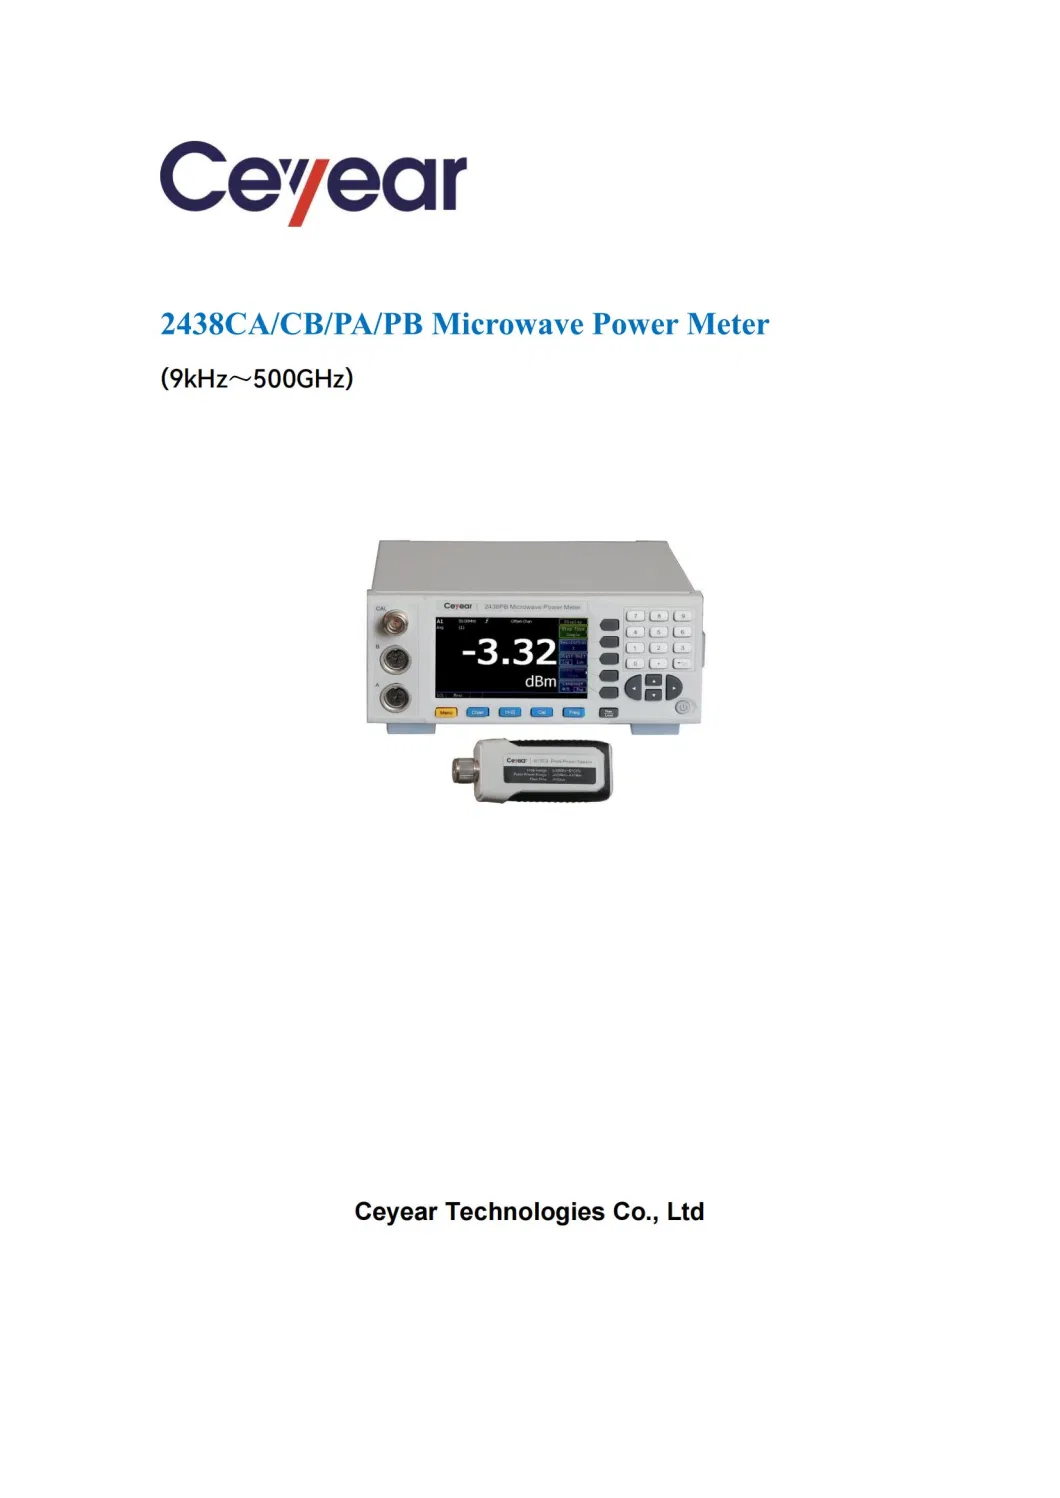 Ceyear 2438ca 9kHz to 500GHz Microwave Power Meter/Frequency Meter